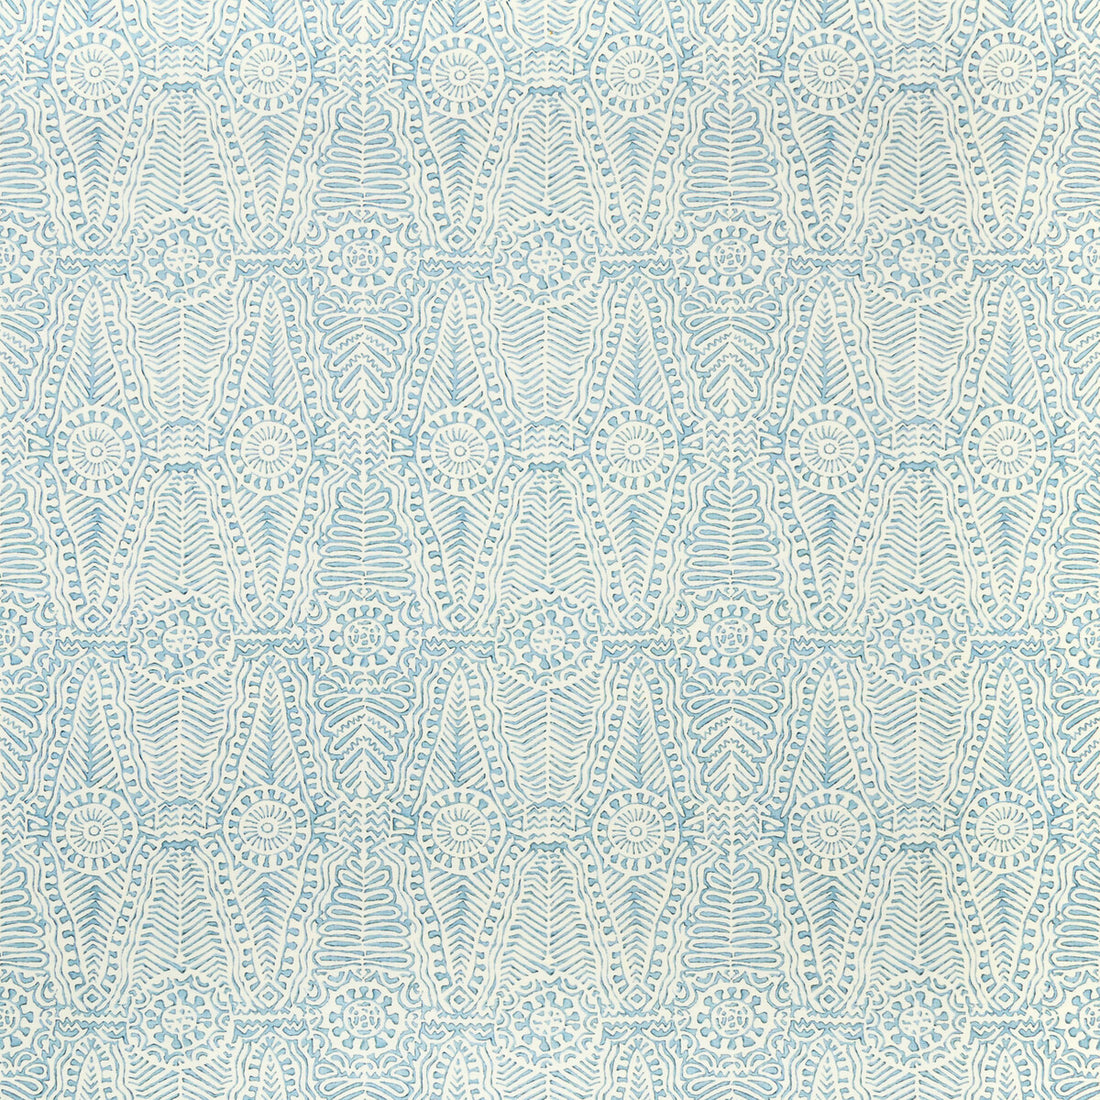 Drayton Print fabric in aegean color - pattern 2020184.13.0 - by Lee Jofa in the Avondale collection